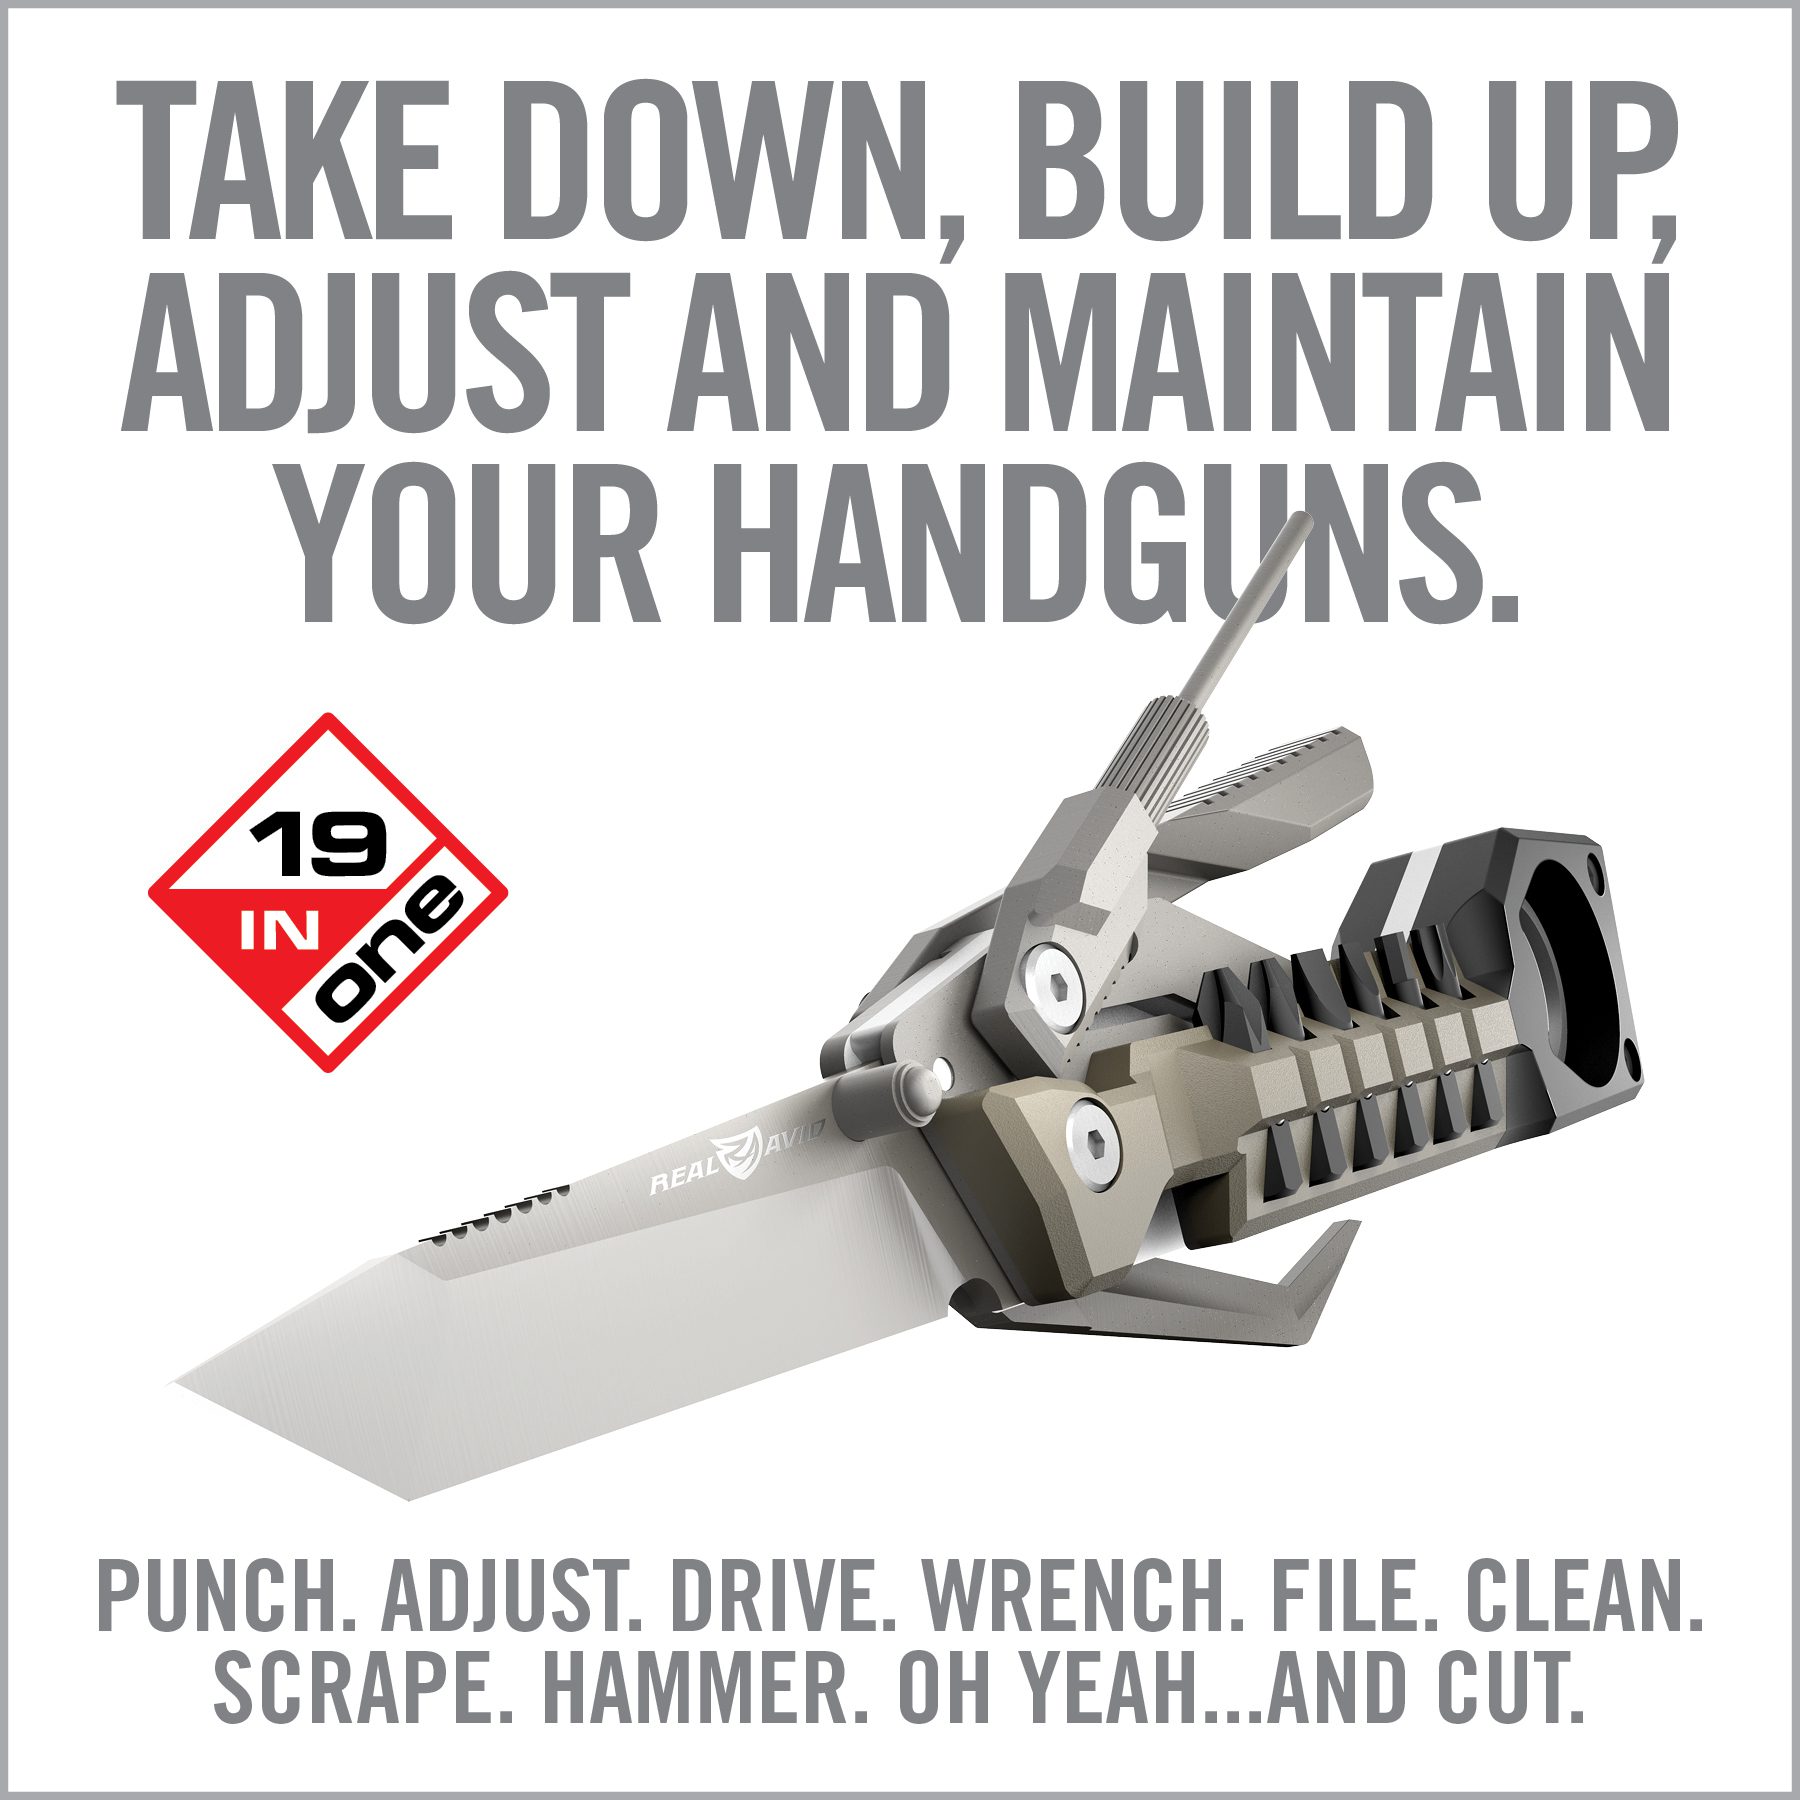 an advertisement for a knife sharper with the words take down build up adjust and maintain your